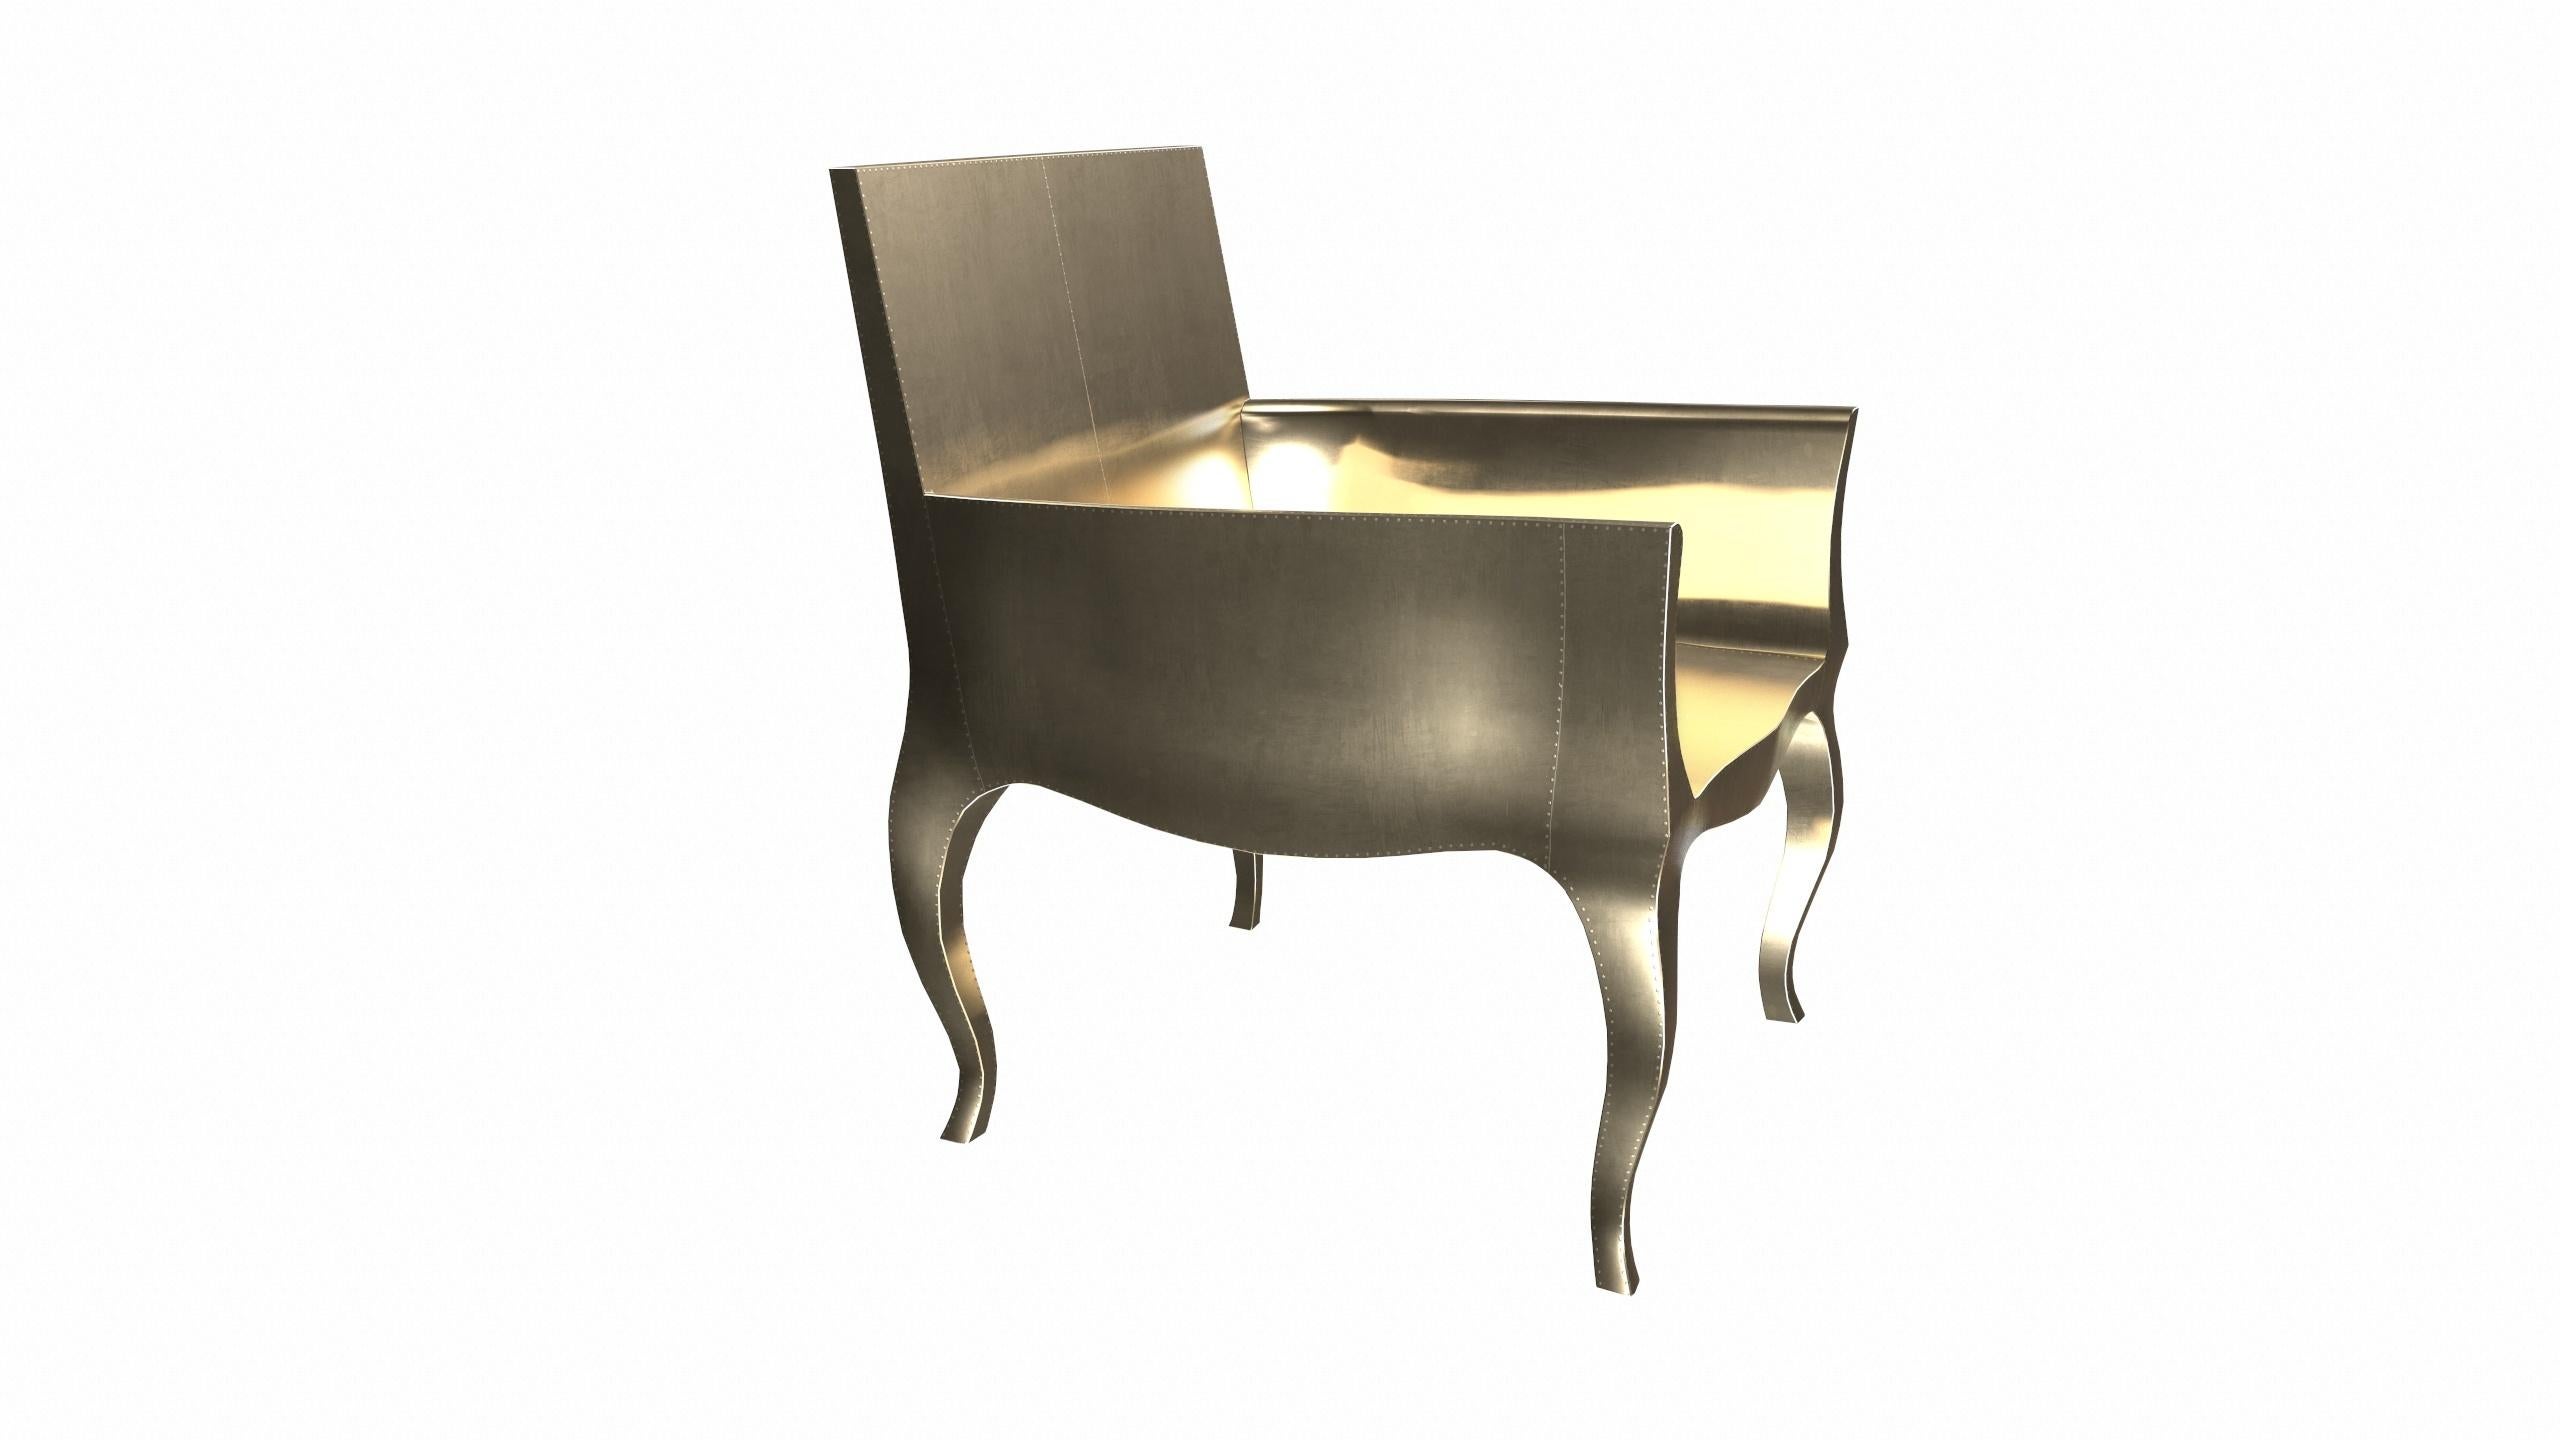 Contemporary Art Deco Desk Chair in Smooth Brass by Paul Mathieu for S. Odegard For Sale